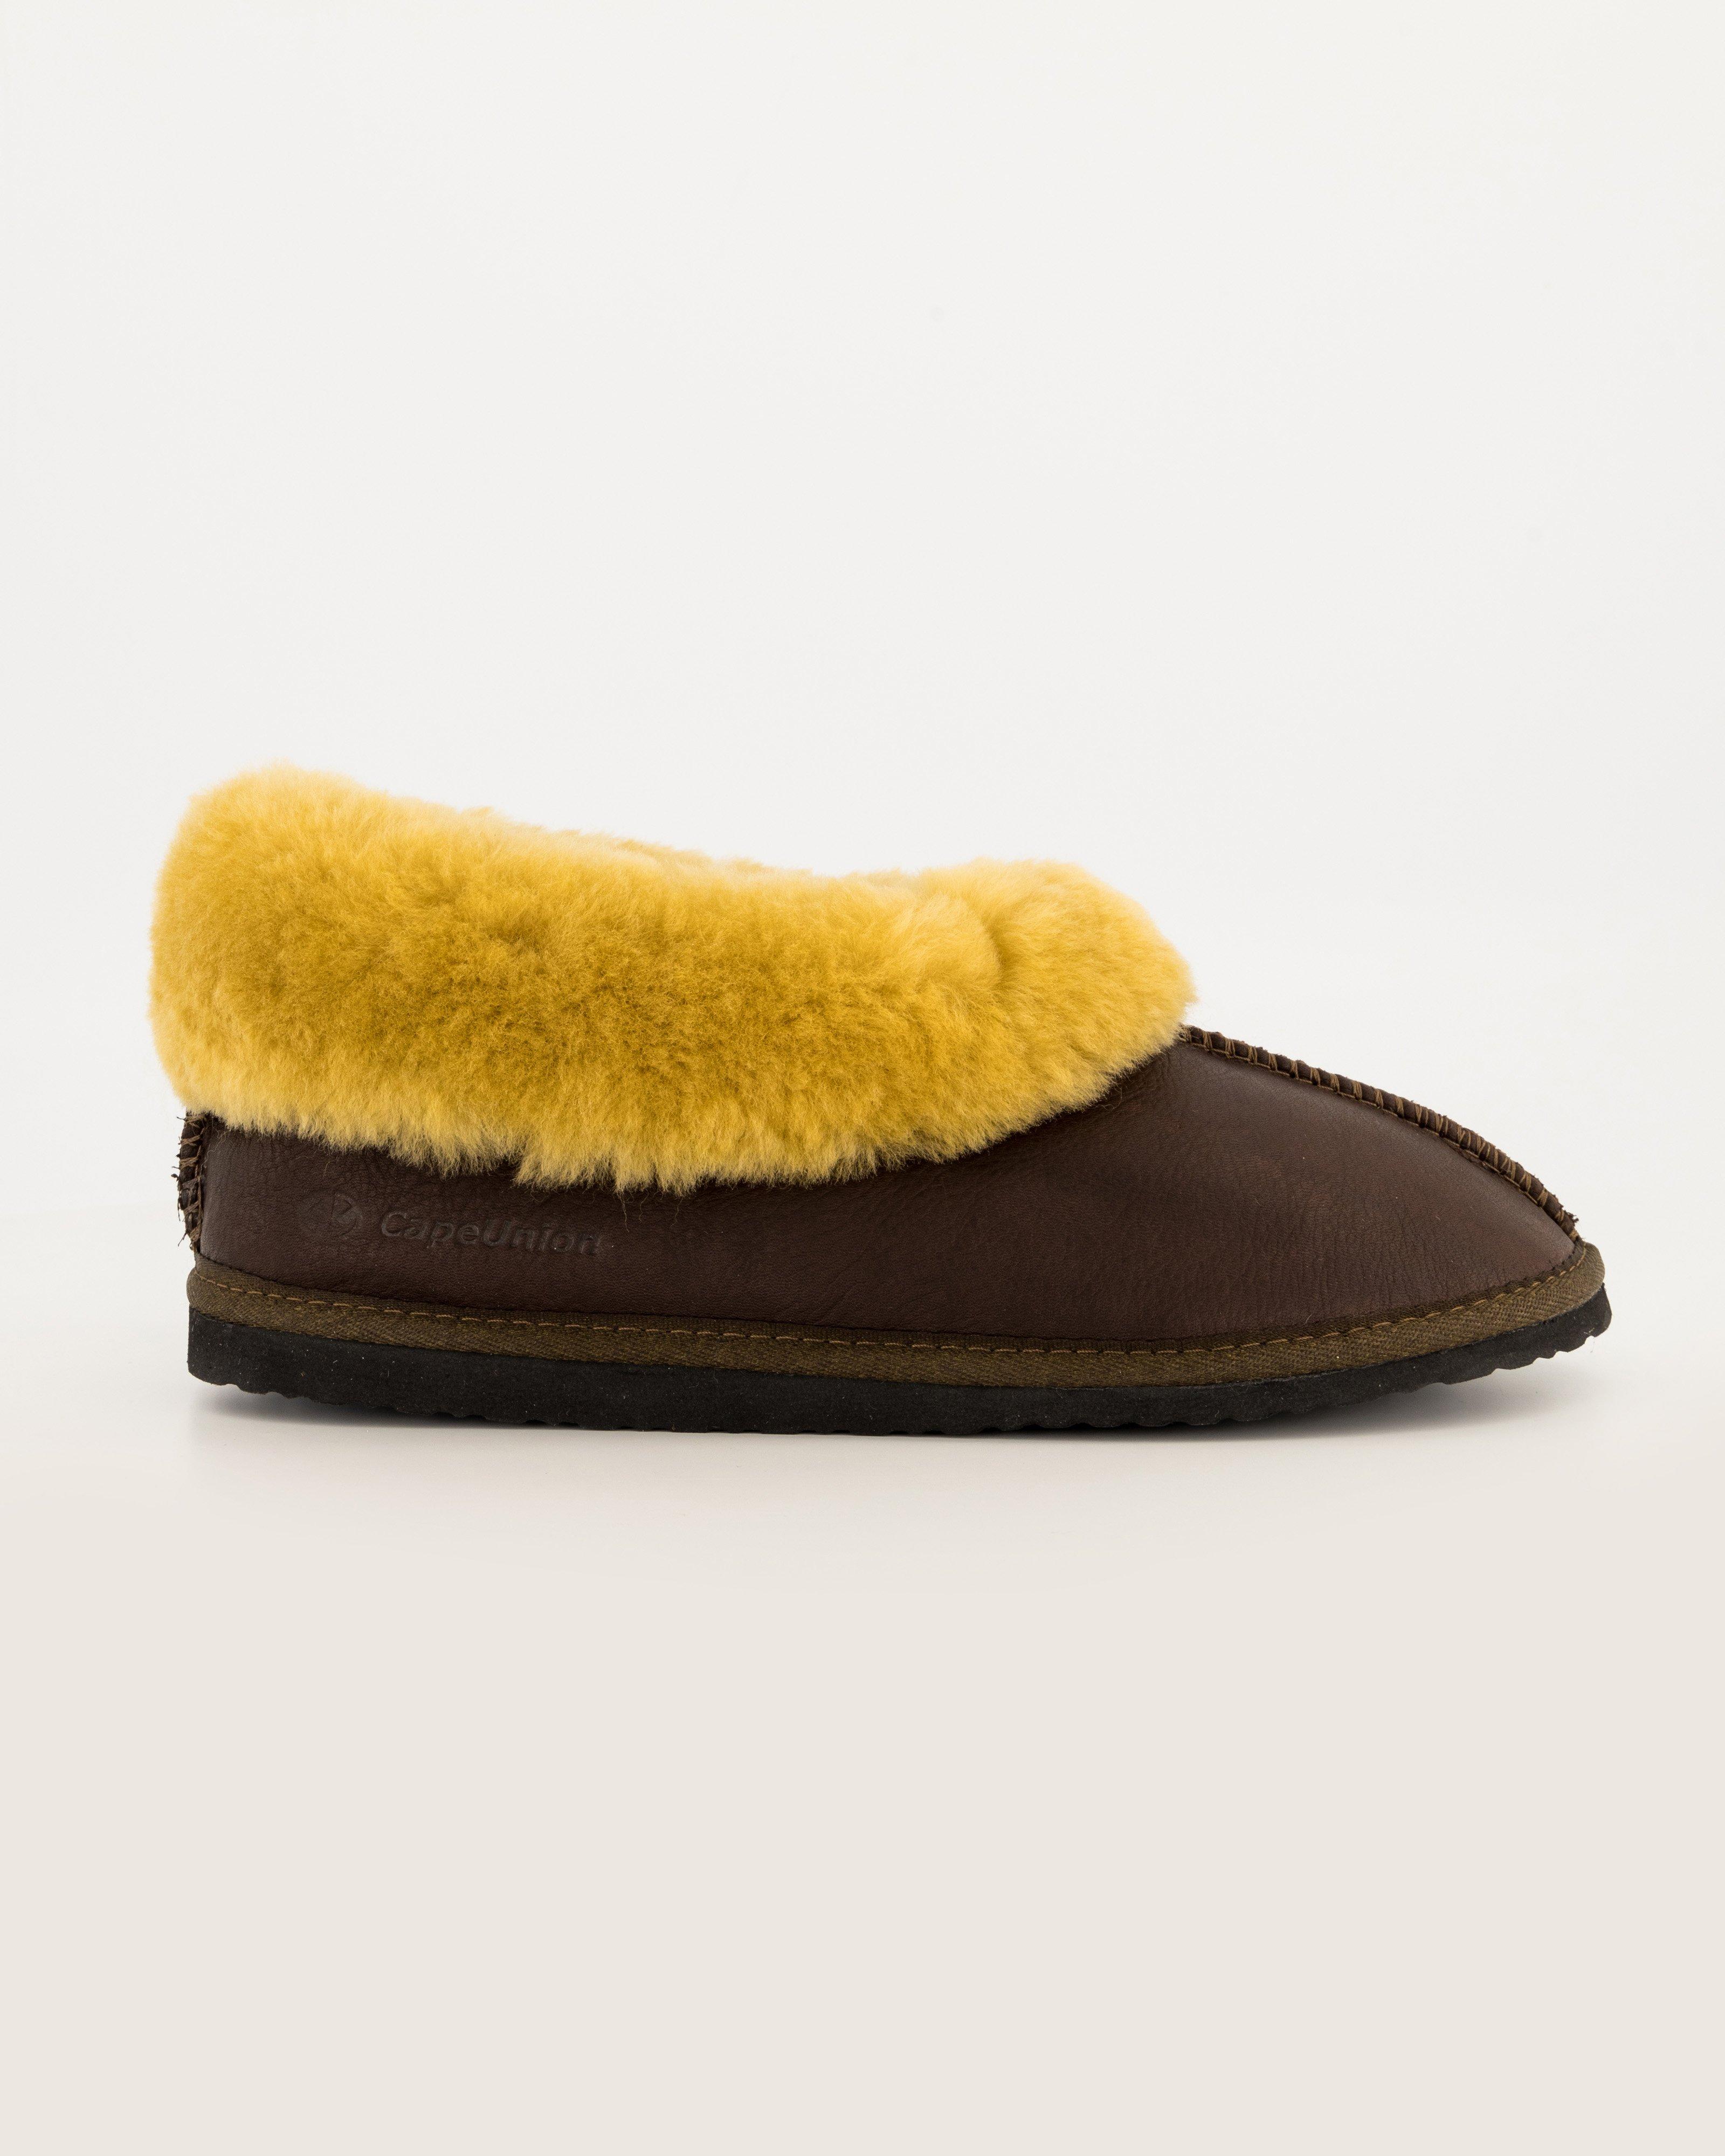 Cape Union Men's Sheepswool Classic Slippers -  Chocolate